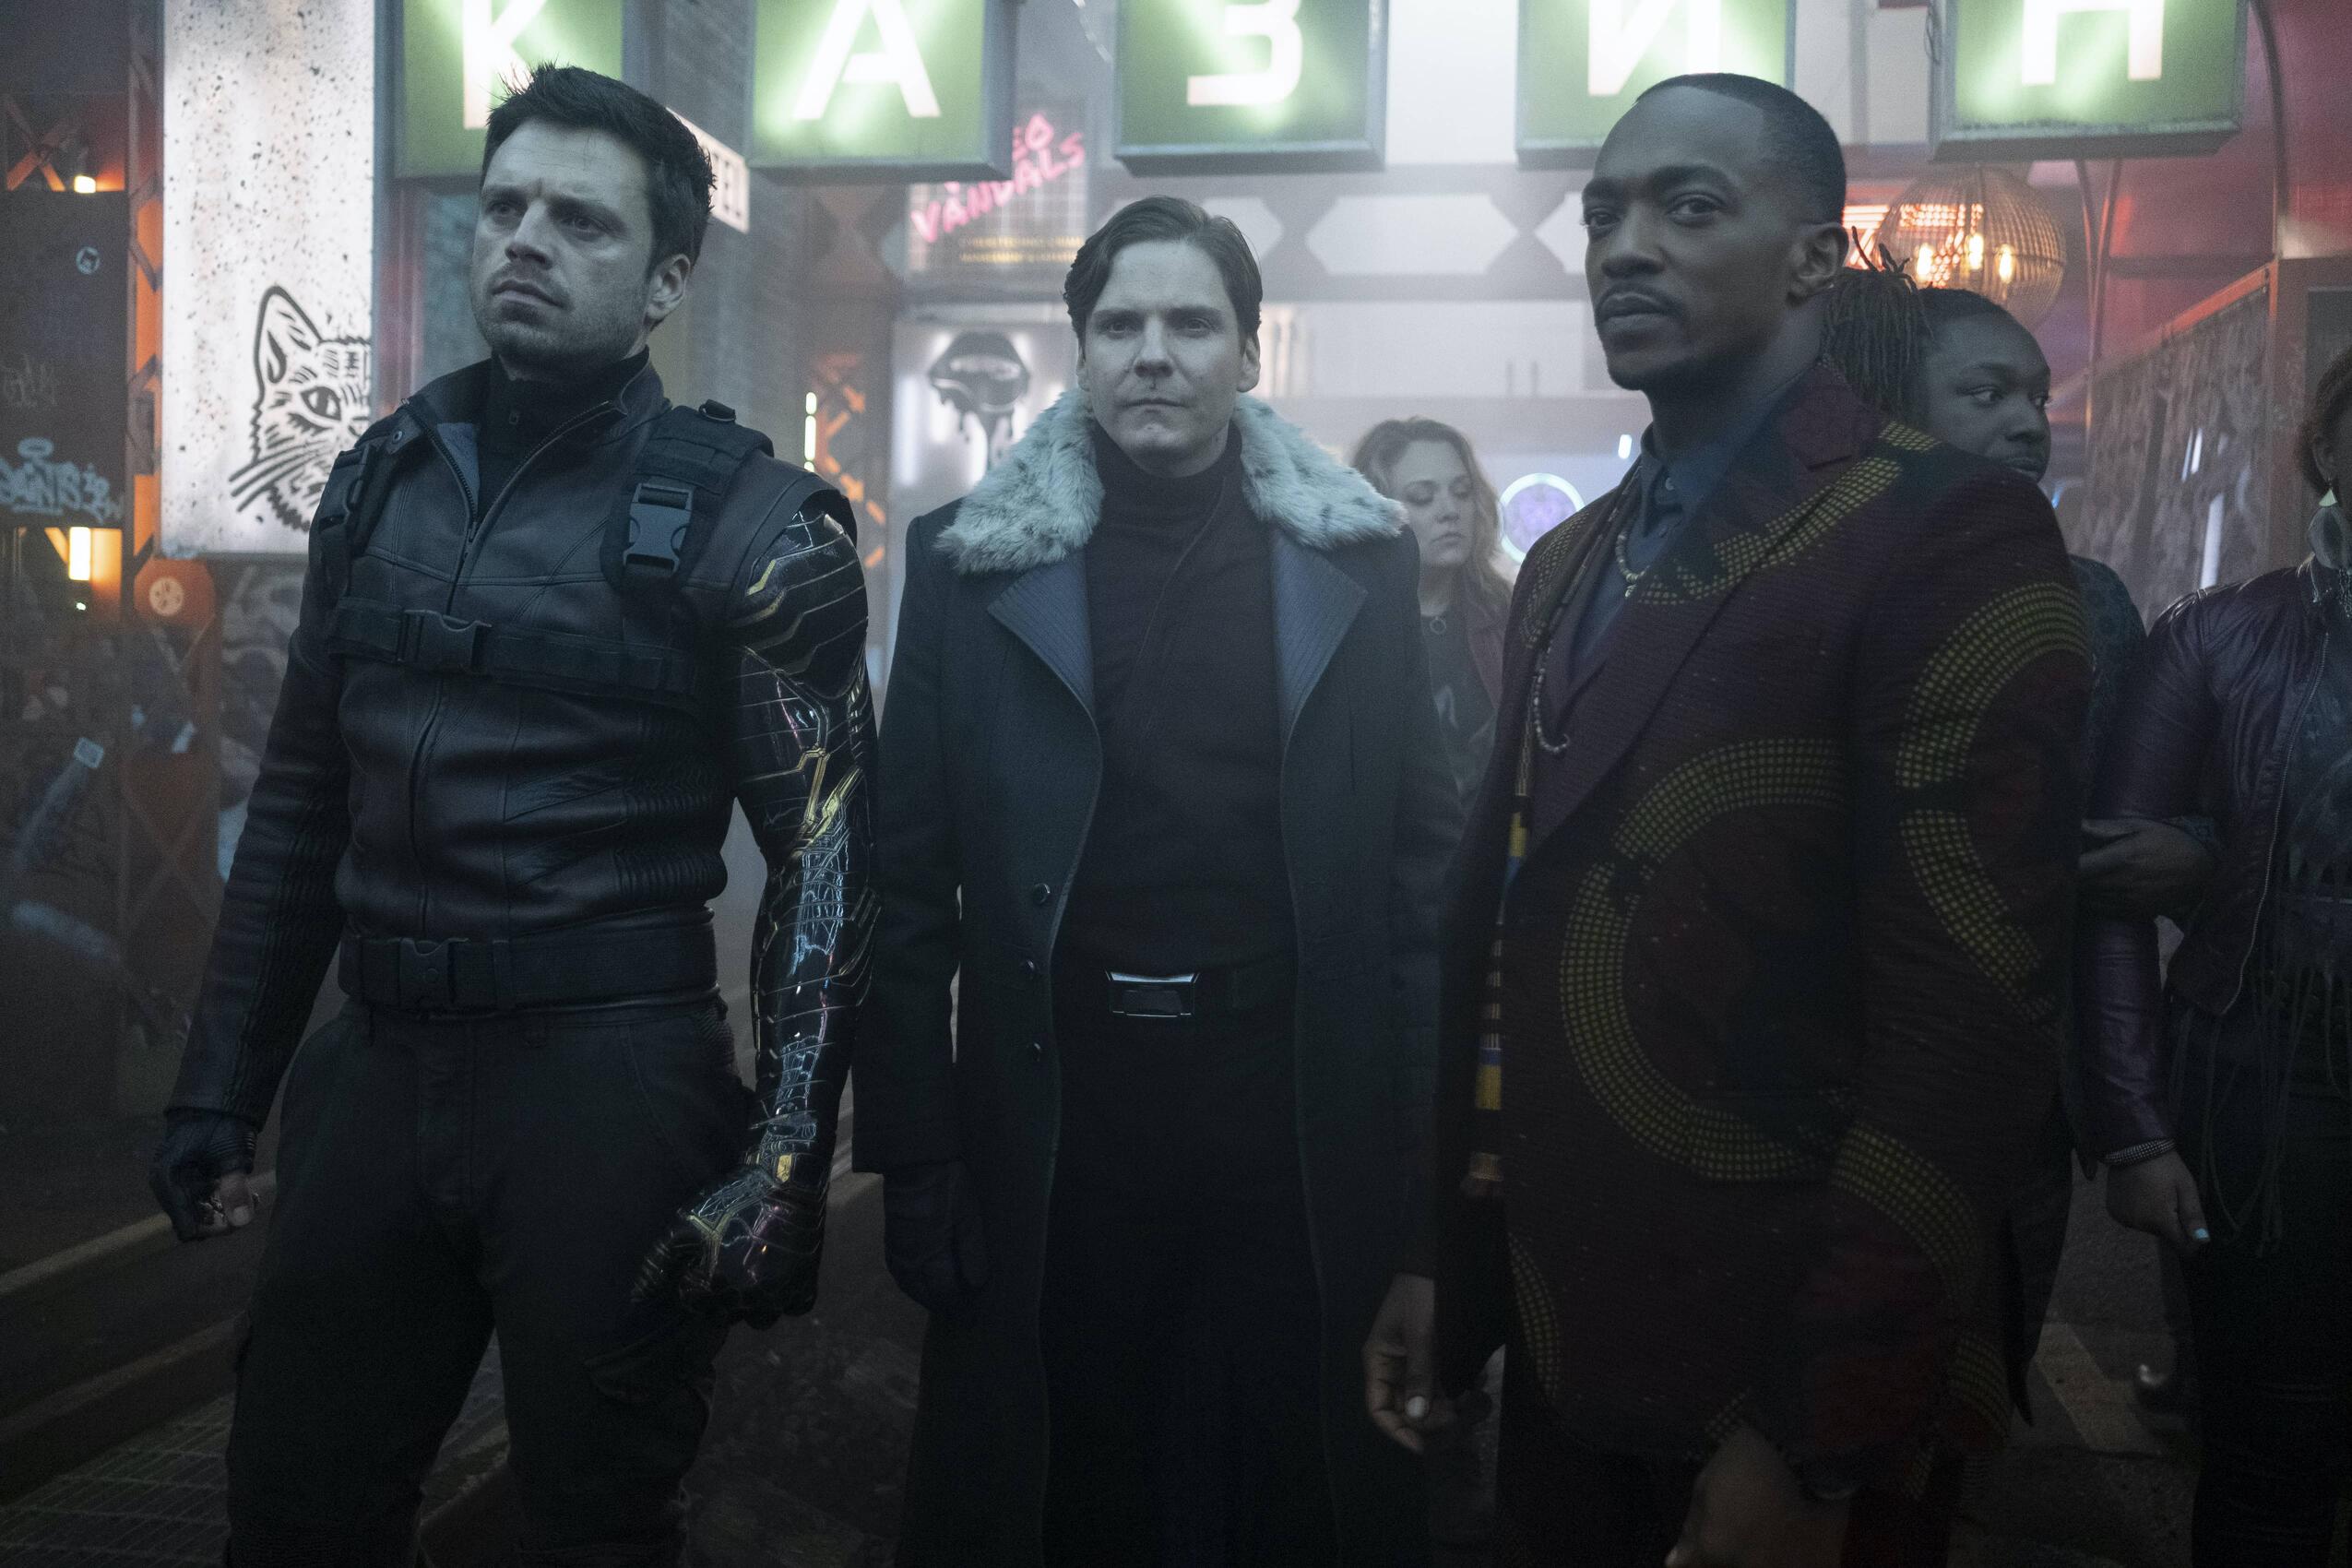 (L-R): Winter Soldier/Bucky Barnes (Sebastian Stan), Zemo (Daniel Brühl) and Falcon/Sam Wilson (Anthony Mackie) in Marvel Studios' THE FALCON AND THE WINTER SOLDIER exclusively on Disney+. Photo by Chuck Zlotnick. ©Marvel Studios 2021. All Rights Reserved.